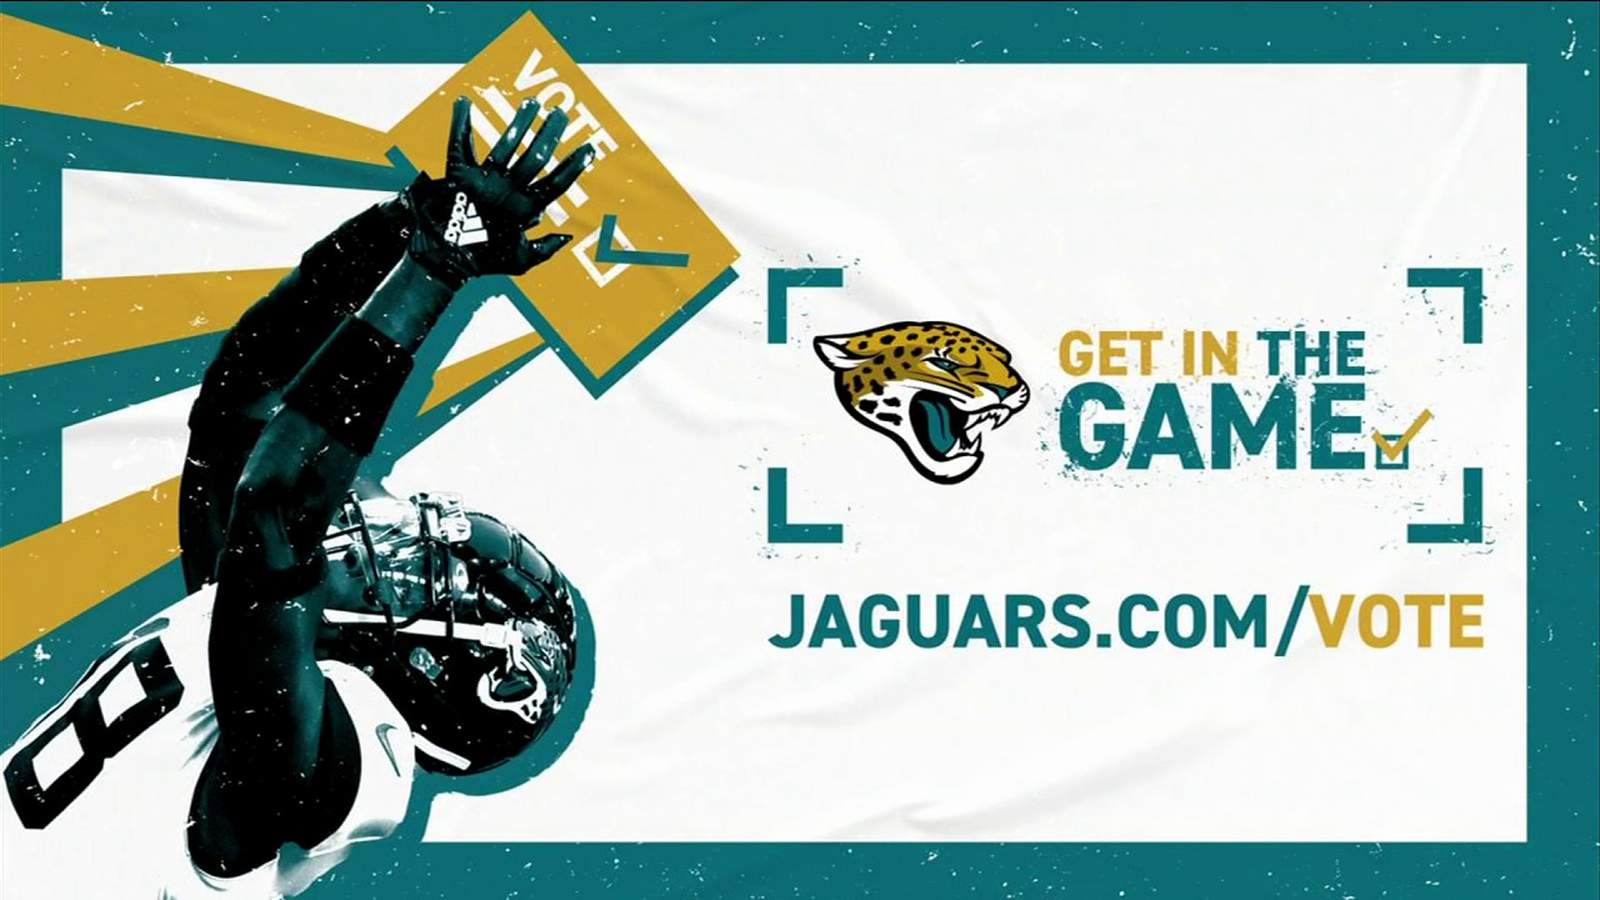 Jaguars kick off ‘Get in the Game’ voter drive